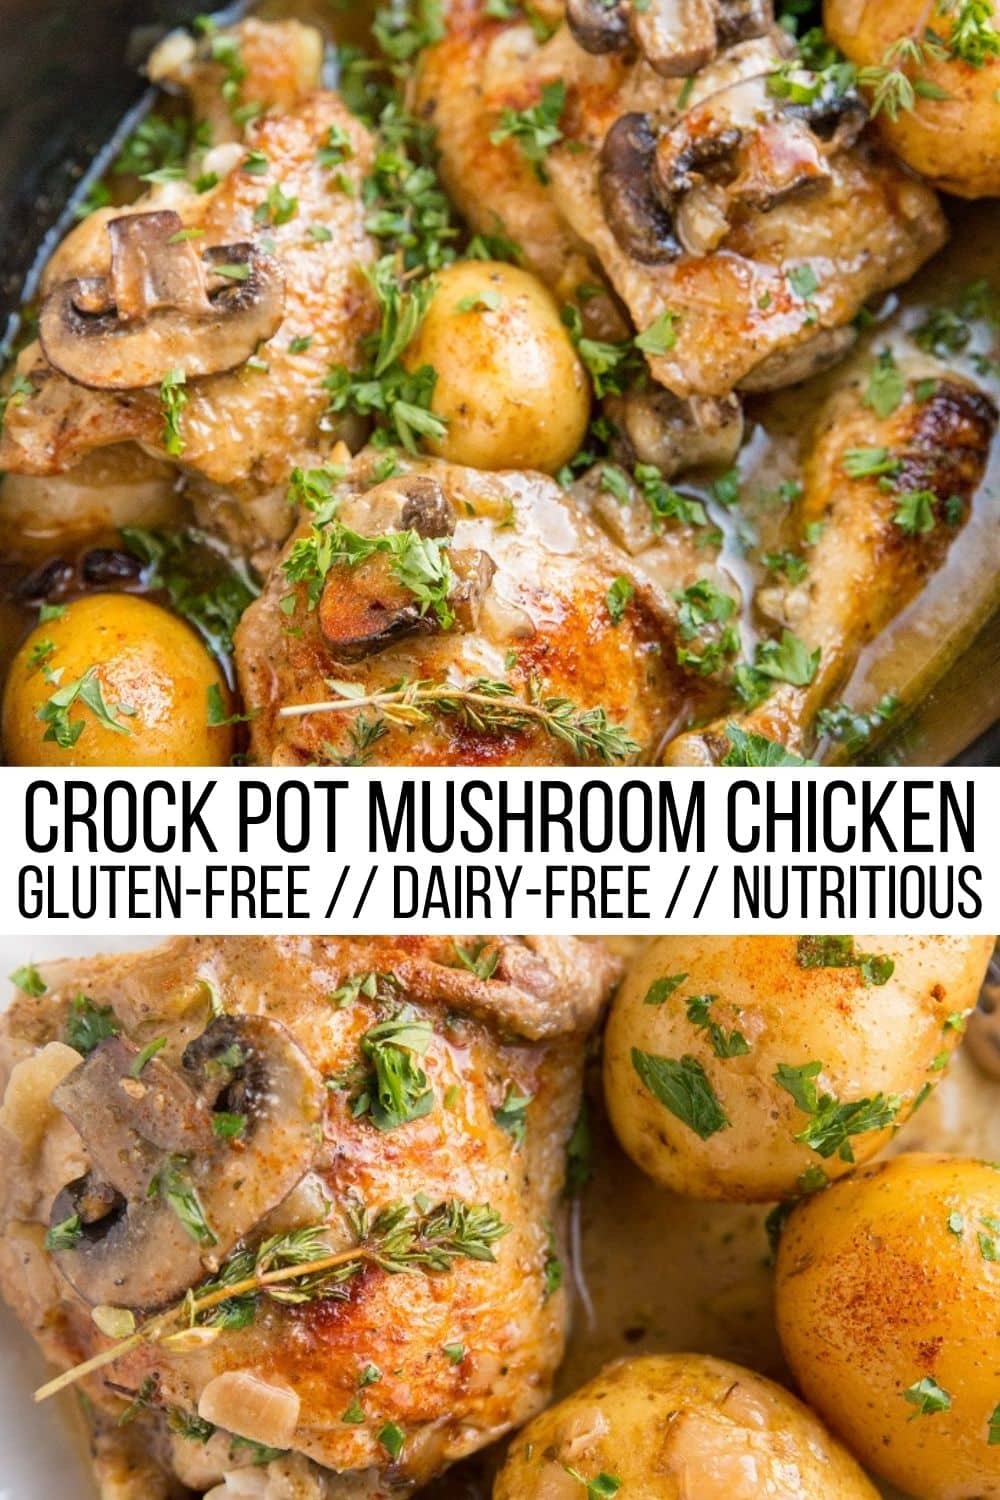 Crock Pot Creamy Mushroom Chicken - dairy-free, gluten-free, paleo, whole30, healthy dinner recipe made easy in the slow cooker!